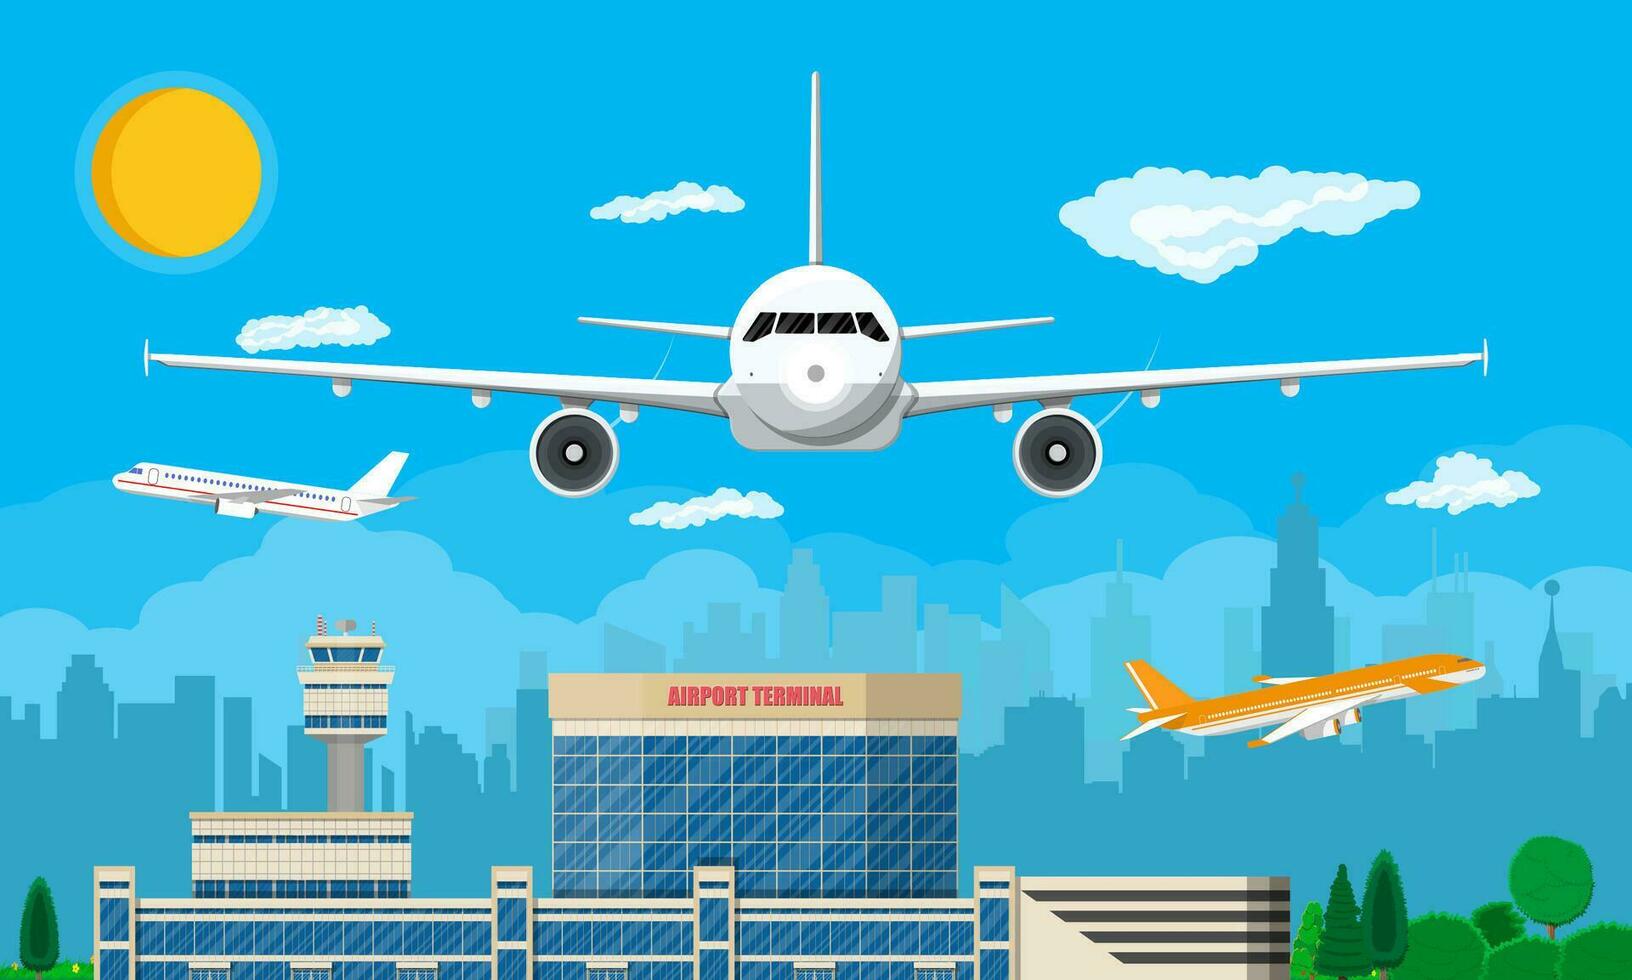 Aircraft above the ground. Airport control tower, terminal building and parking area. Cityscape. Sky with clouds and sun. Vector illustration in flat style